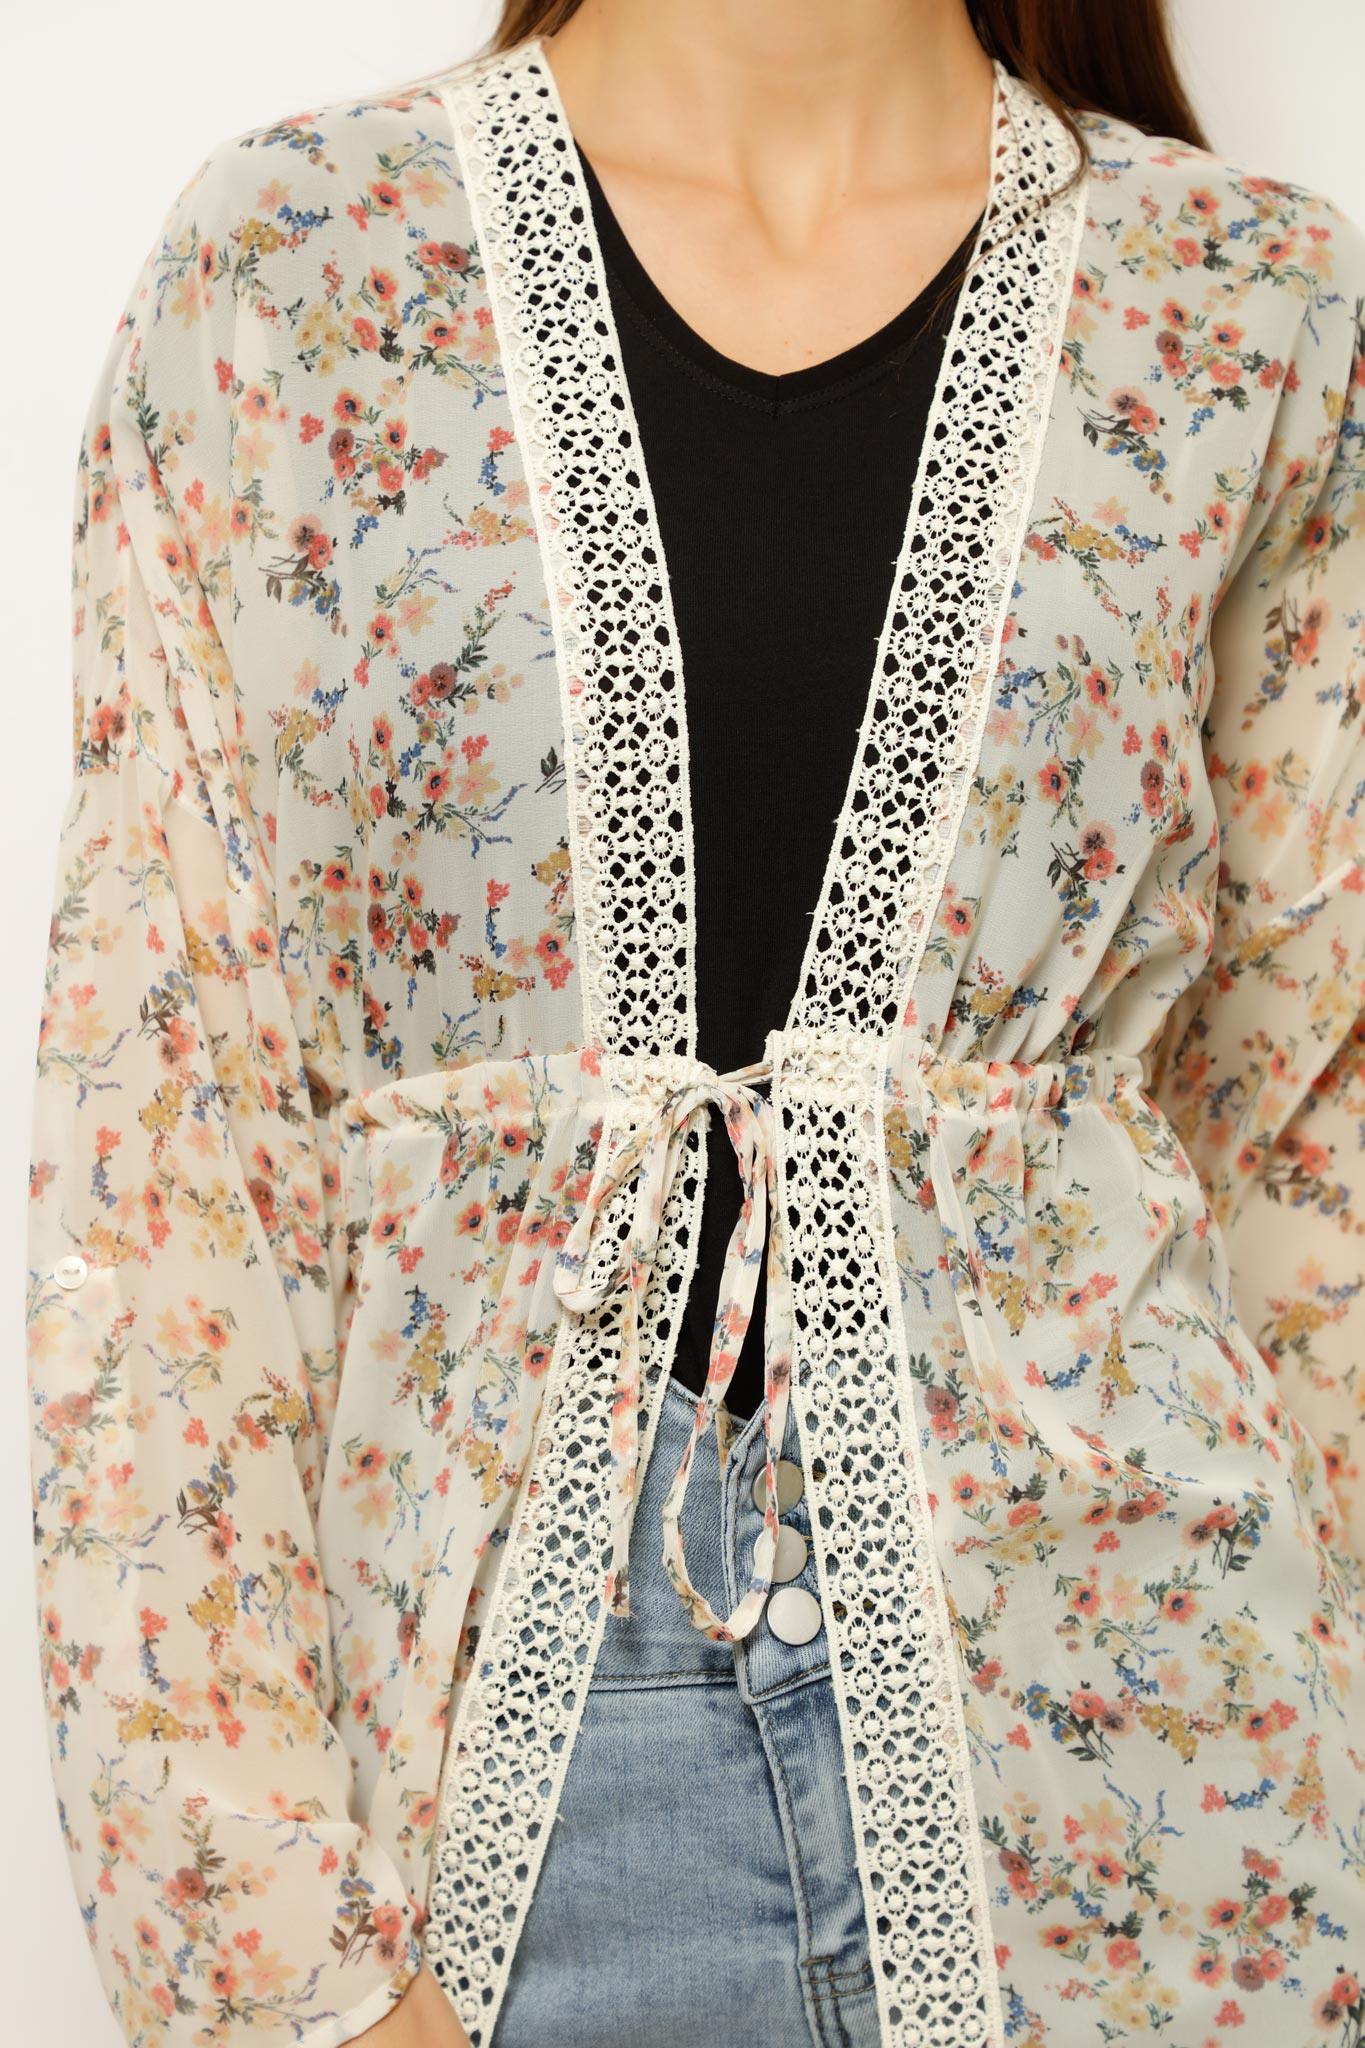 HIRKA FLOWY FLORAL CARDIGAN, CARDIGAN, CORADO, cardigan, corado fashion, coradomoda, FASHION, floral, flowy, lace, lifestyle, off white, printed, see through, street style, style, summer, tie, top, vibe, women, coradomoda, coradomoda.com